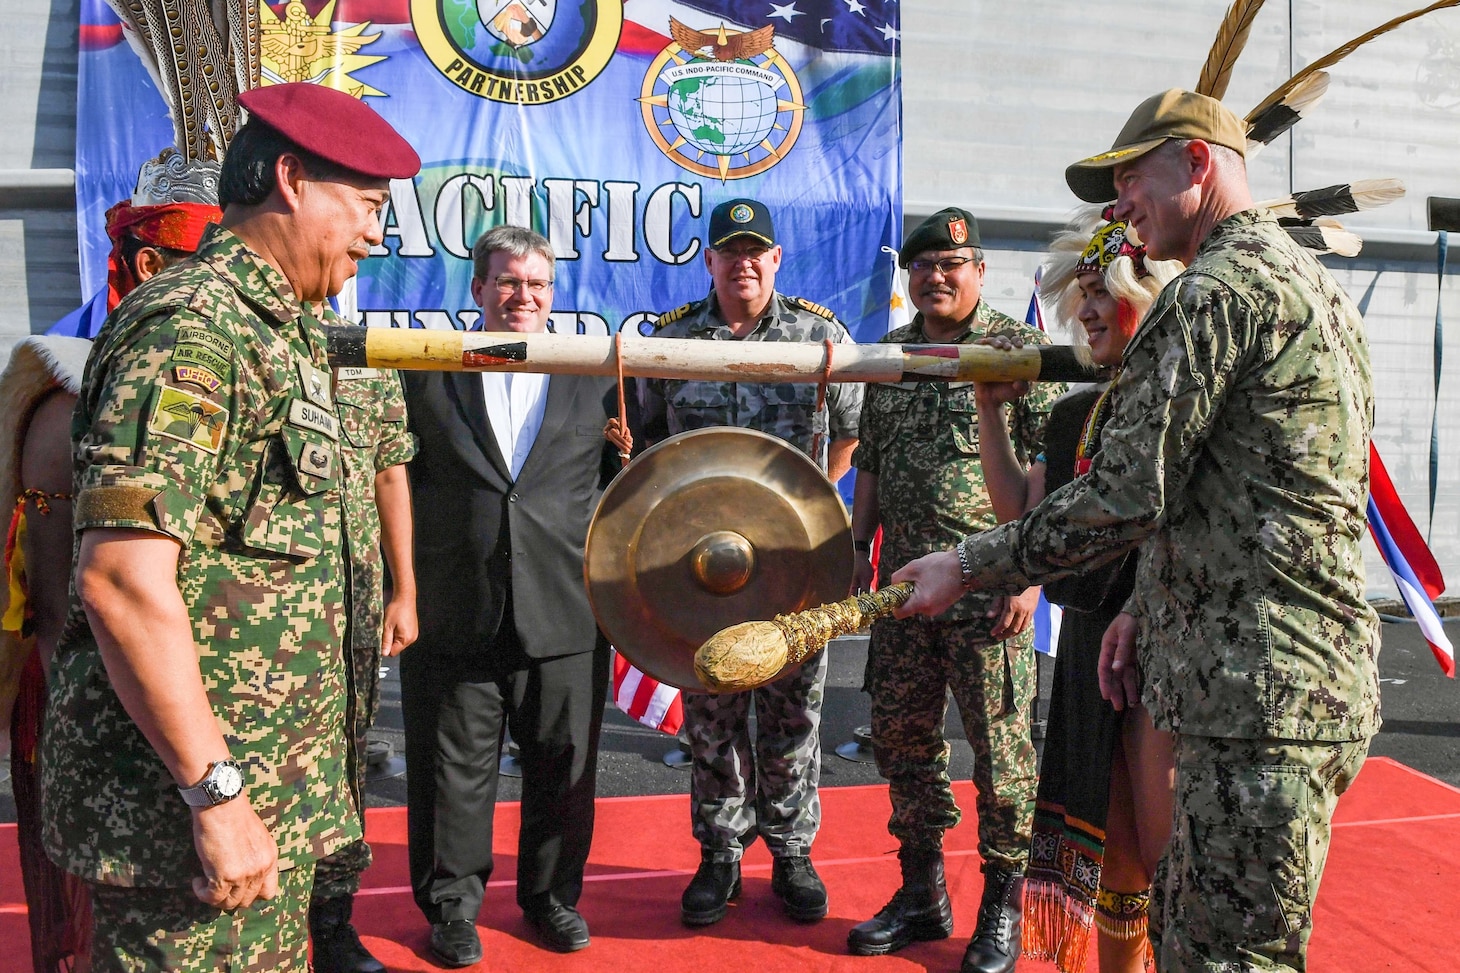 KUCHING, Malaysia (March 30, 2019) – U.S. Navy Capt. Randy Van Rossum, Pacific Partnership 2019 mission commander, rings the ceremonial gong to open Pacific Partnership 2019 in Malaysia. Pacific Partnership, now in its 14th iteration, is the largest annual multinational humanitarian assistance and disaster relief preparedness mission conducted in the Indo-Pacific. Each year the mission team works collectively with host and partner nations to enhance regional interoperability and disaster response capabilities, increase security and stability in the region, and foster new and enduring friendships in the Indo-Pacific.